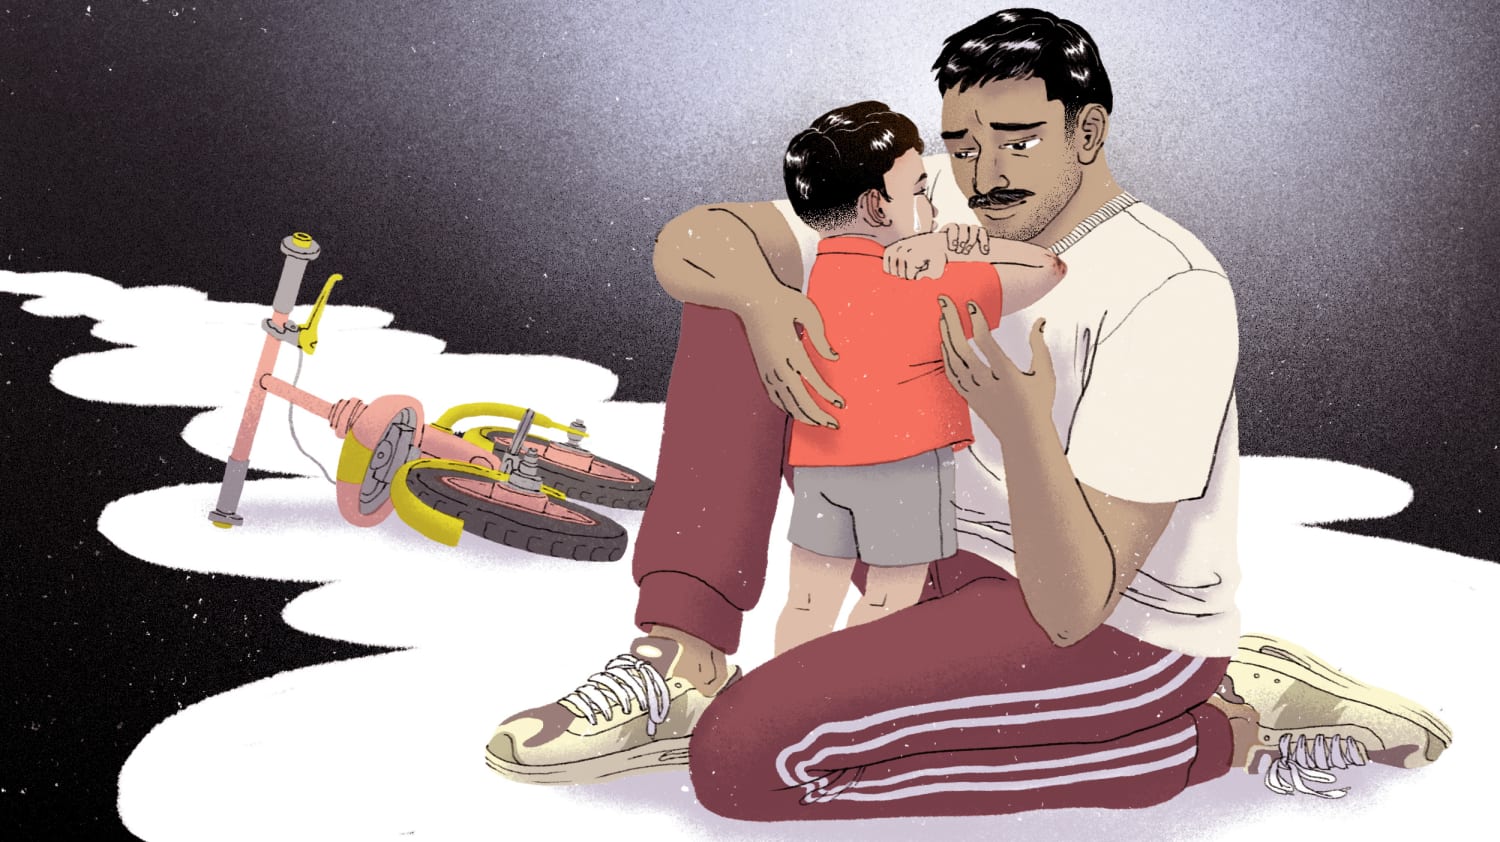 On Father's Day, free your sons from the bonds of an outdated masculinity